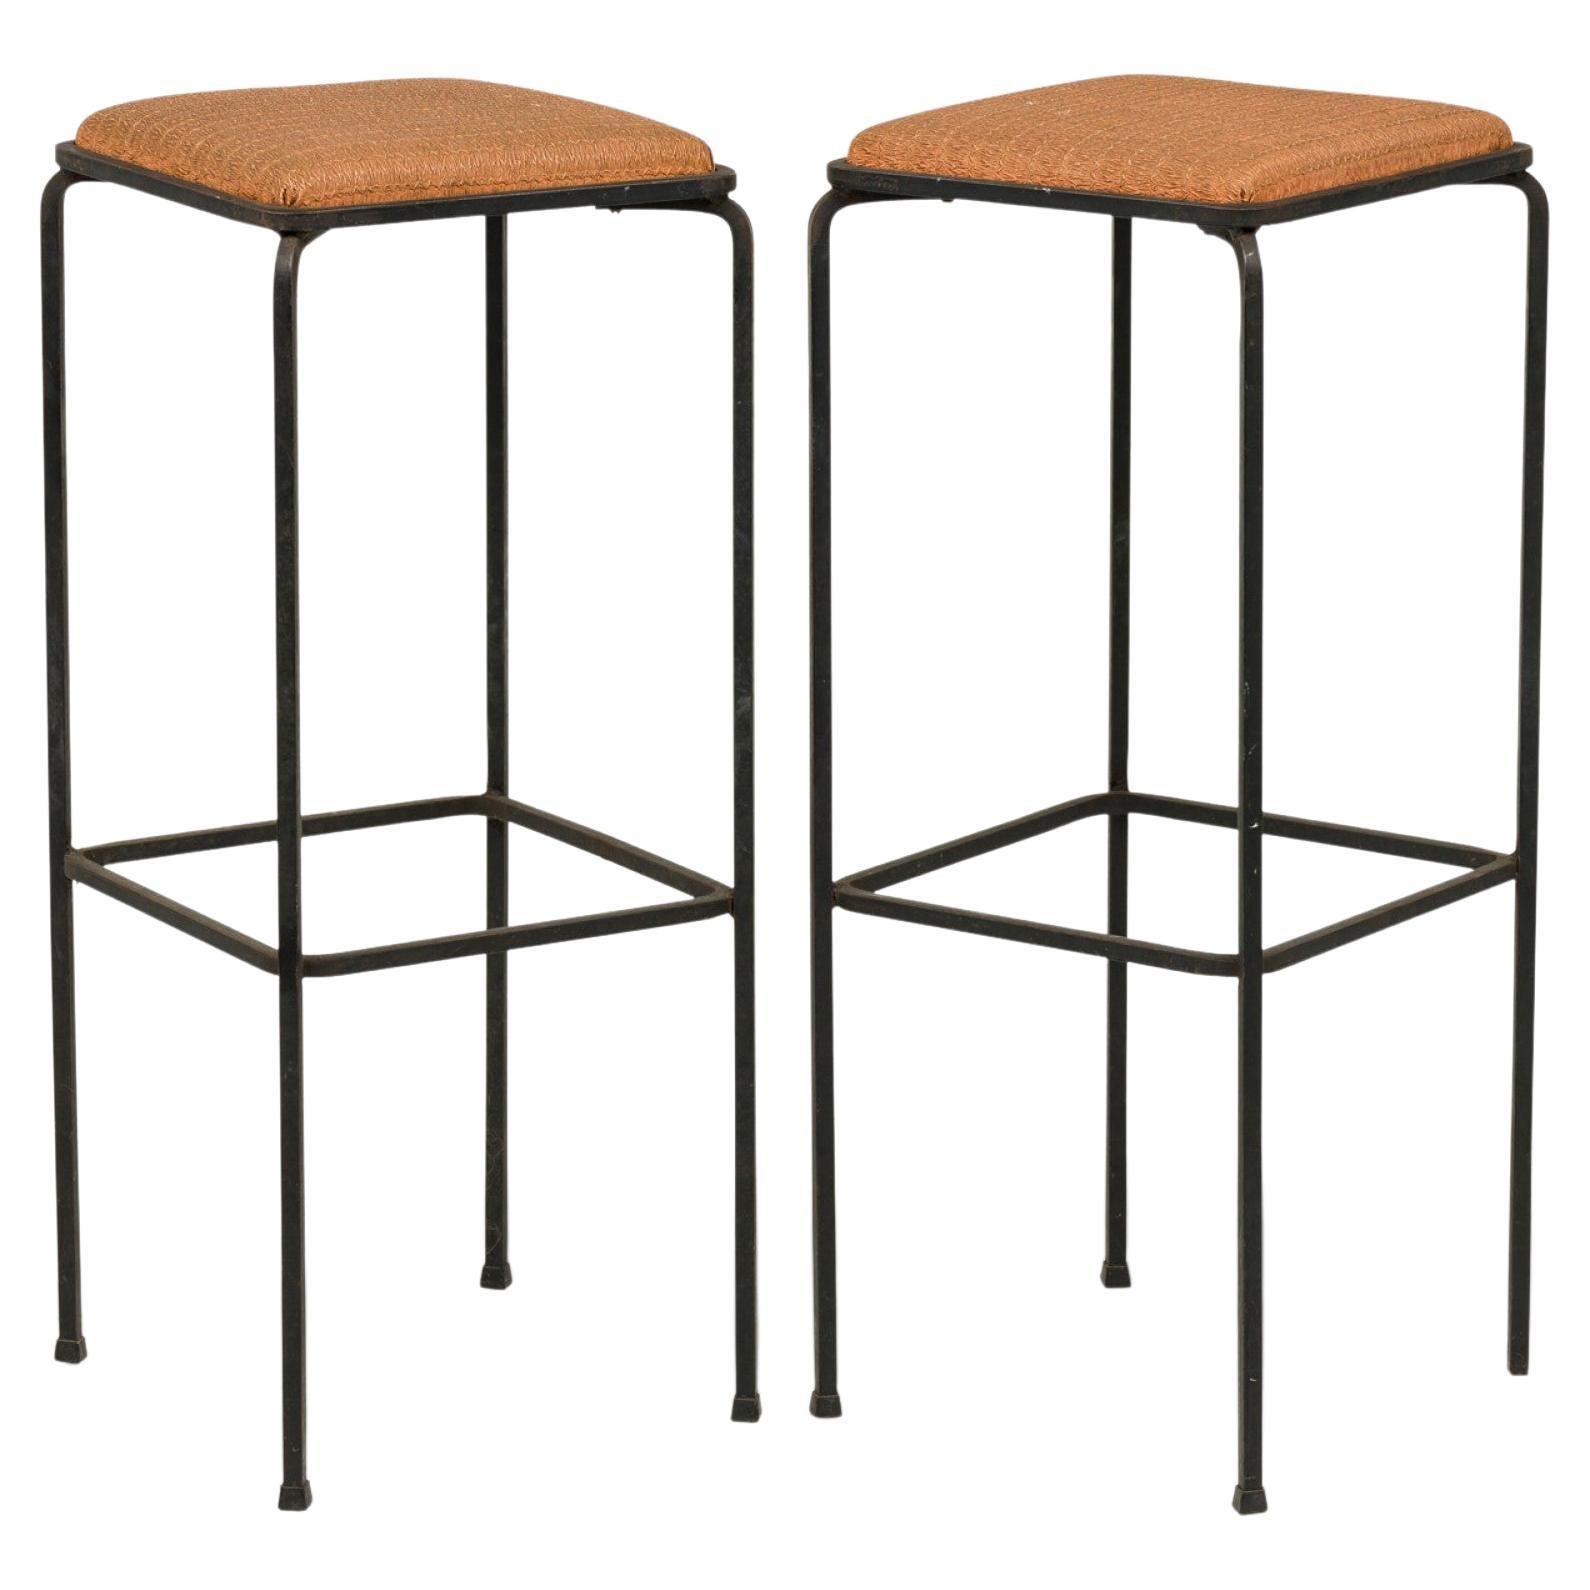 Set of 4 Midcentury Italian Square Wrought Iron Frame Bar Stools For Sale